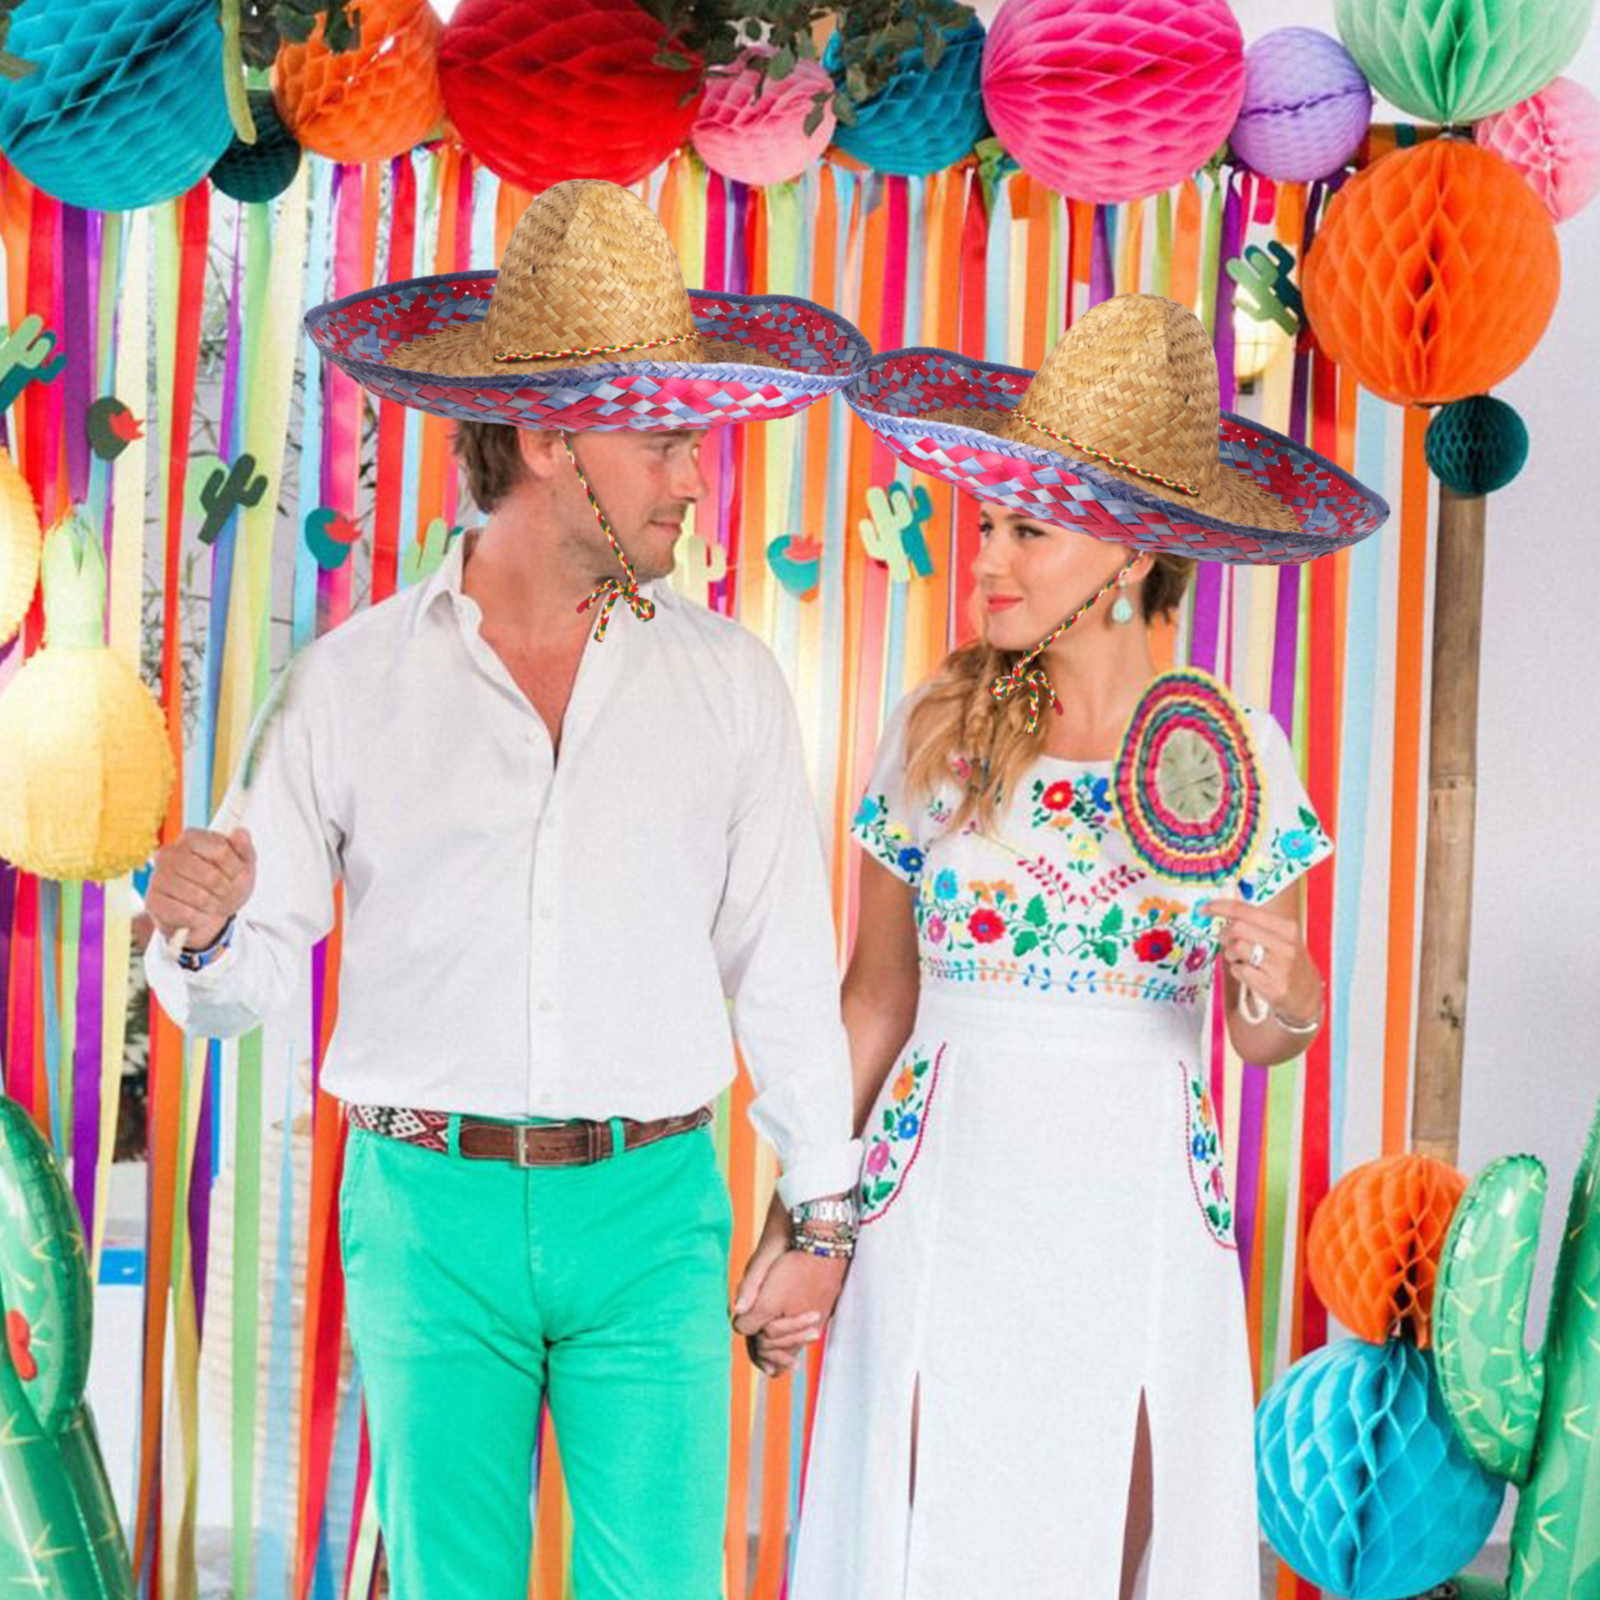 2Pcs Mexican Sombrero Straw Hat for Cinco De Mayo Mexican Hat Mexican Theme Party Decorations - image 4 of 11